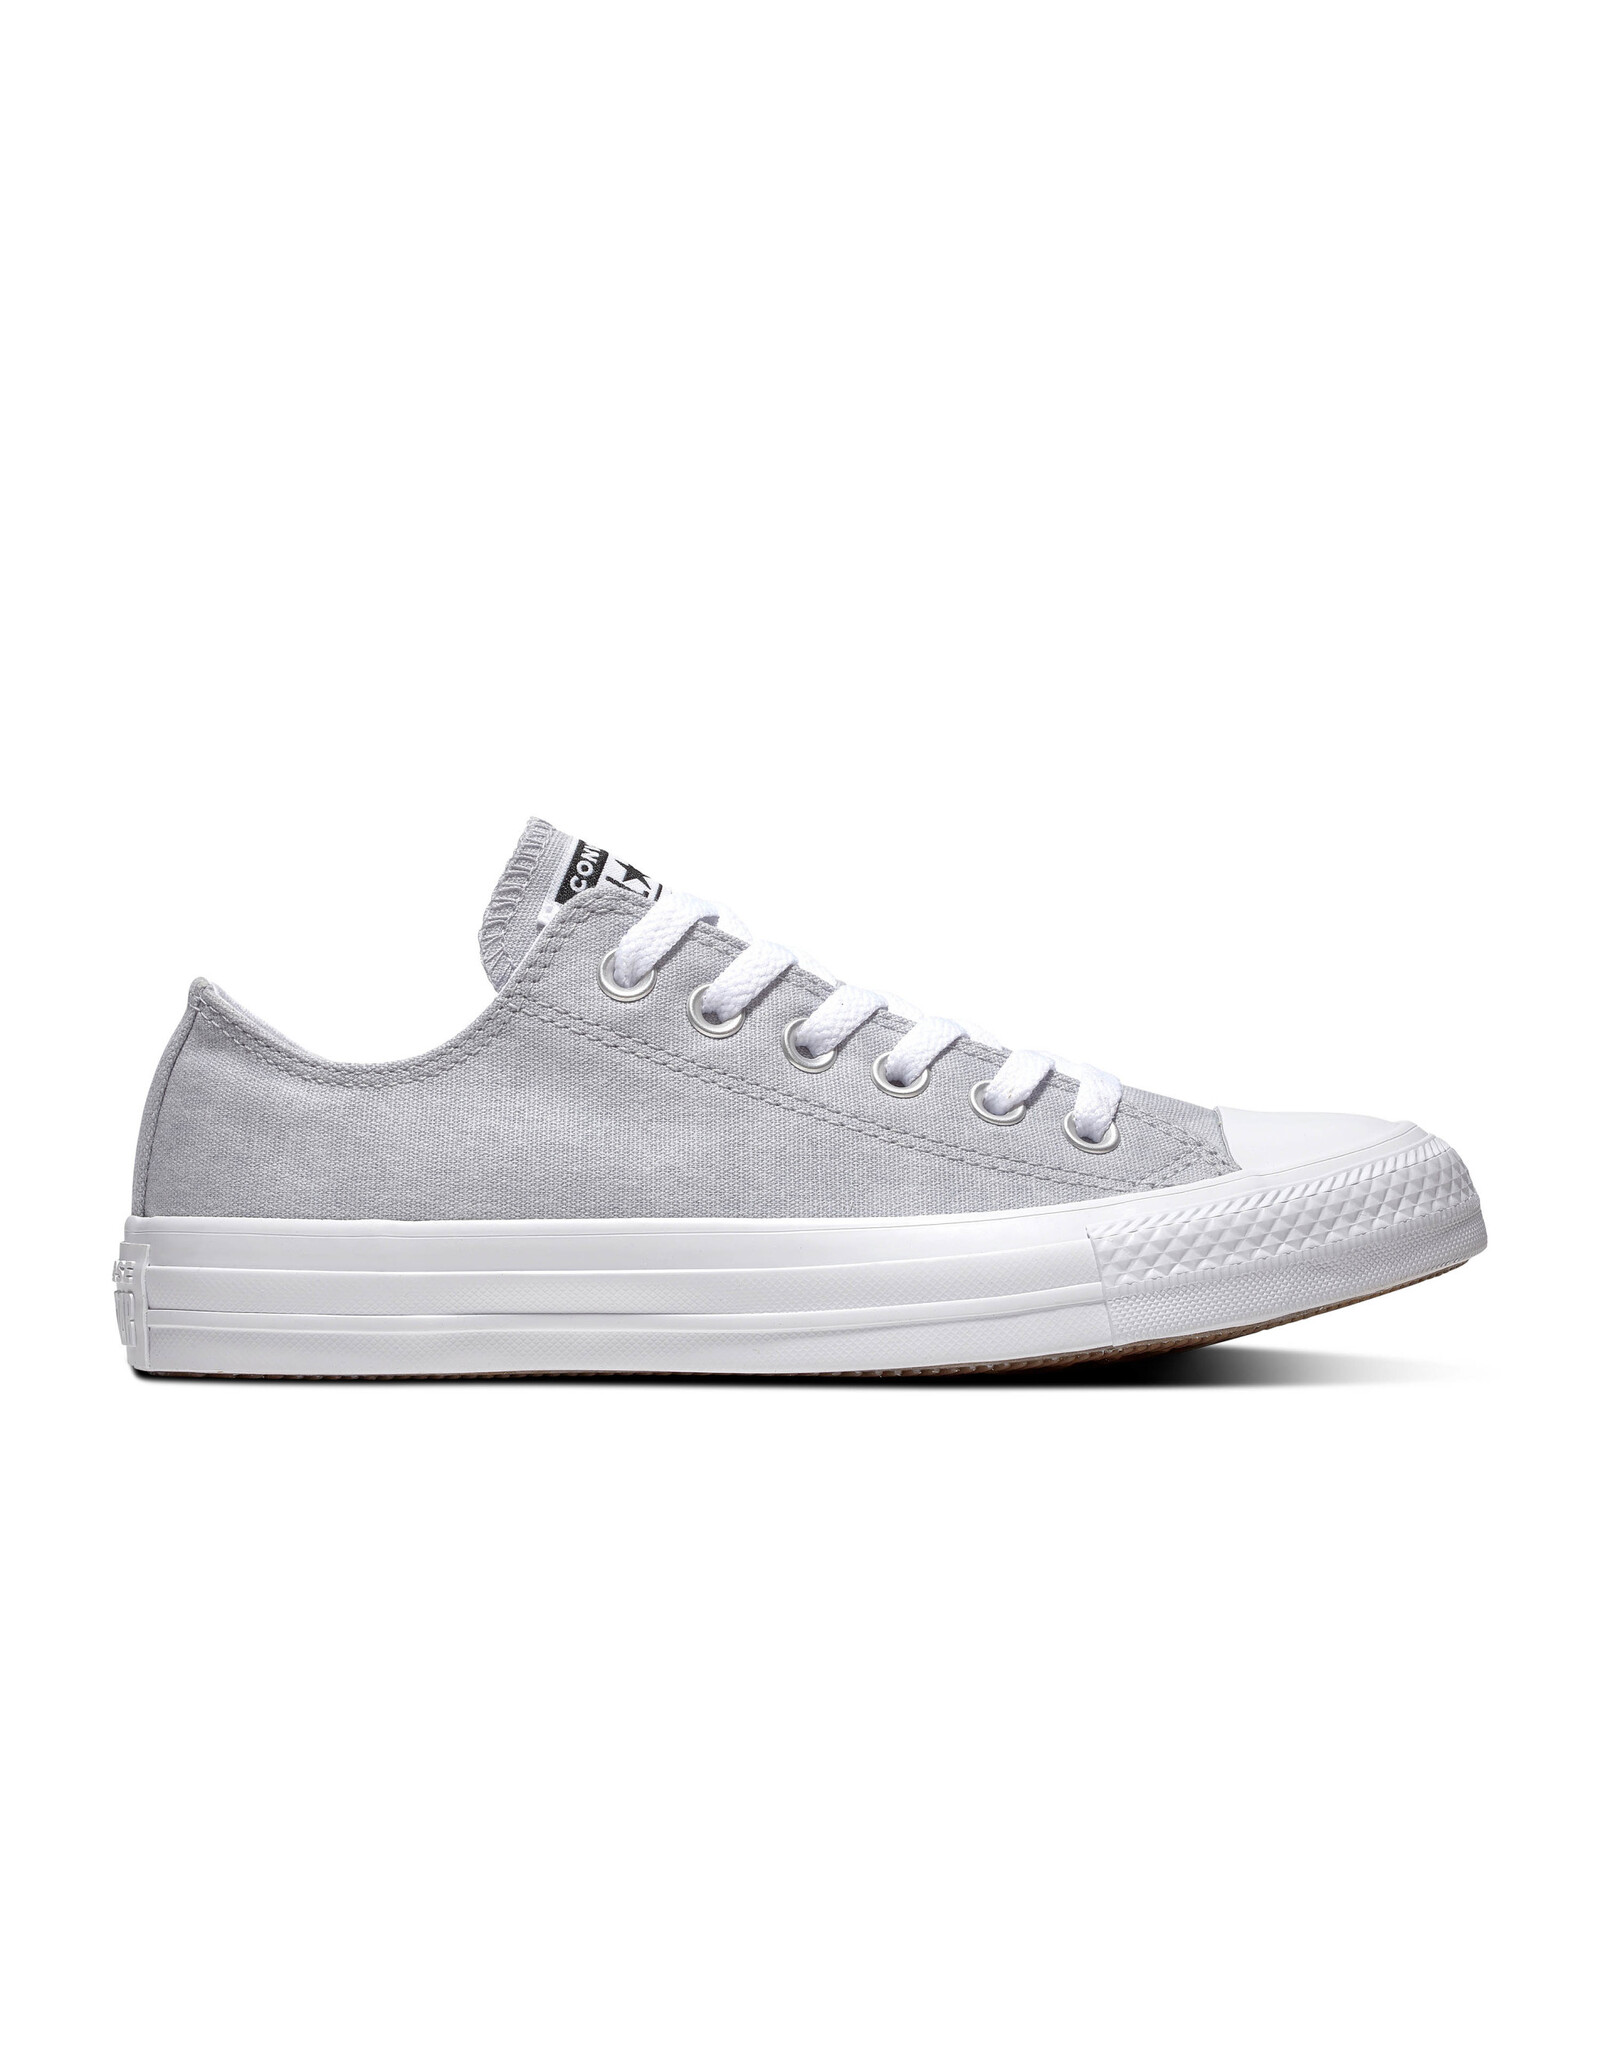 CHUCK TAYLOR ALL STAR OX WOLF GREY/WHITE/WHITE C13WO-163181C